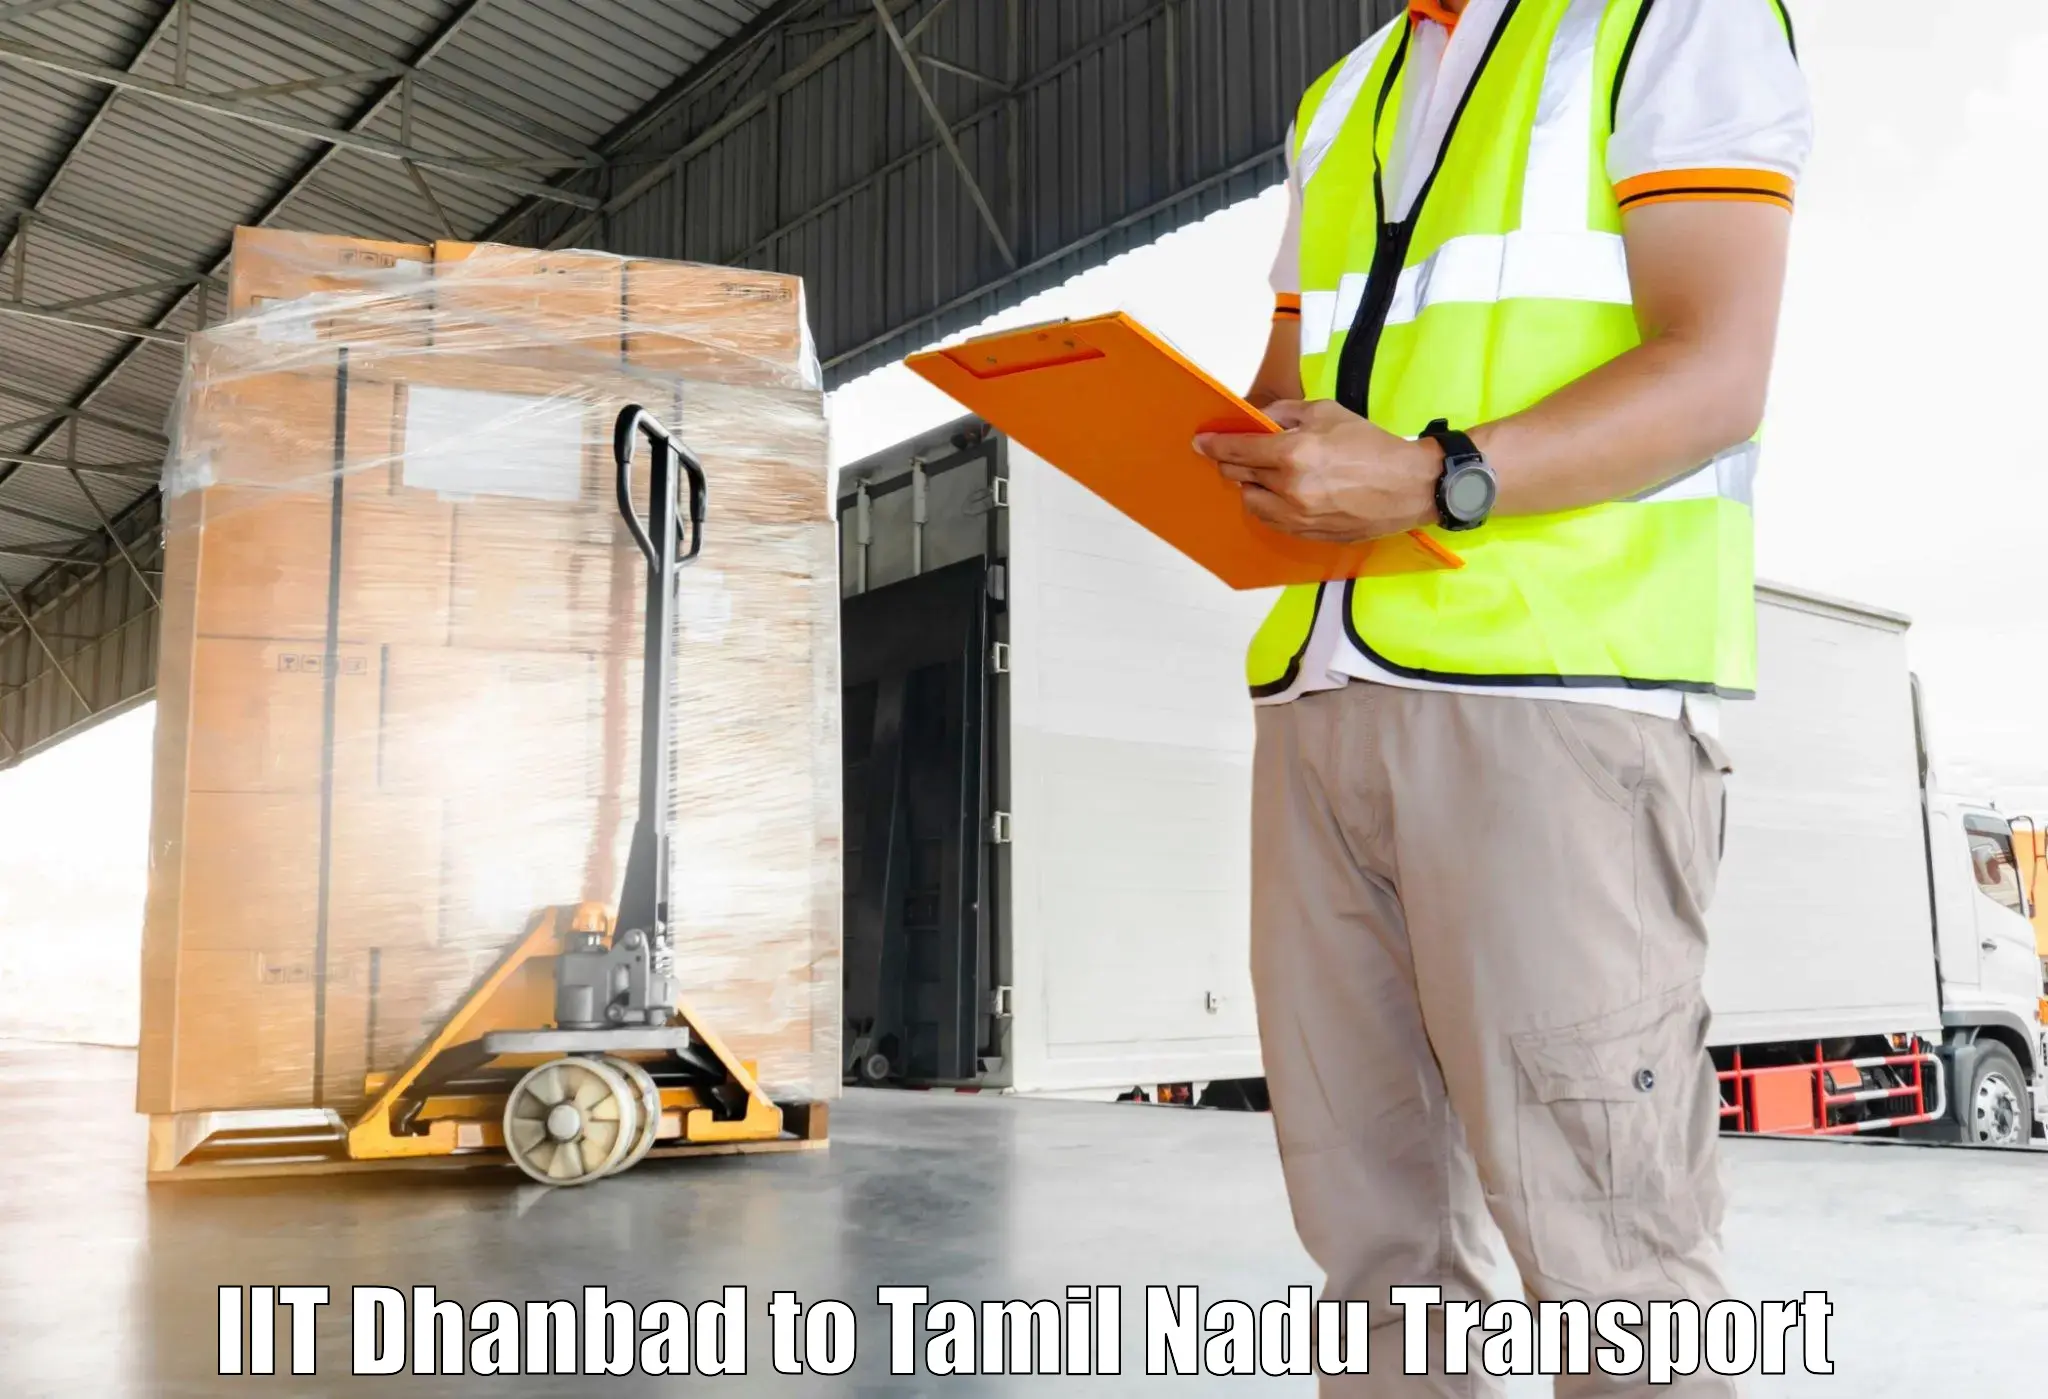 Daily parcel service transport IIT Dhanbad to Gobichettipalayam